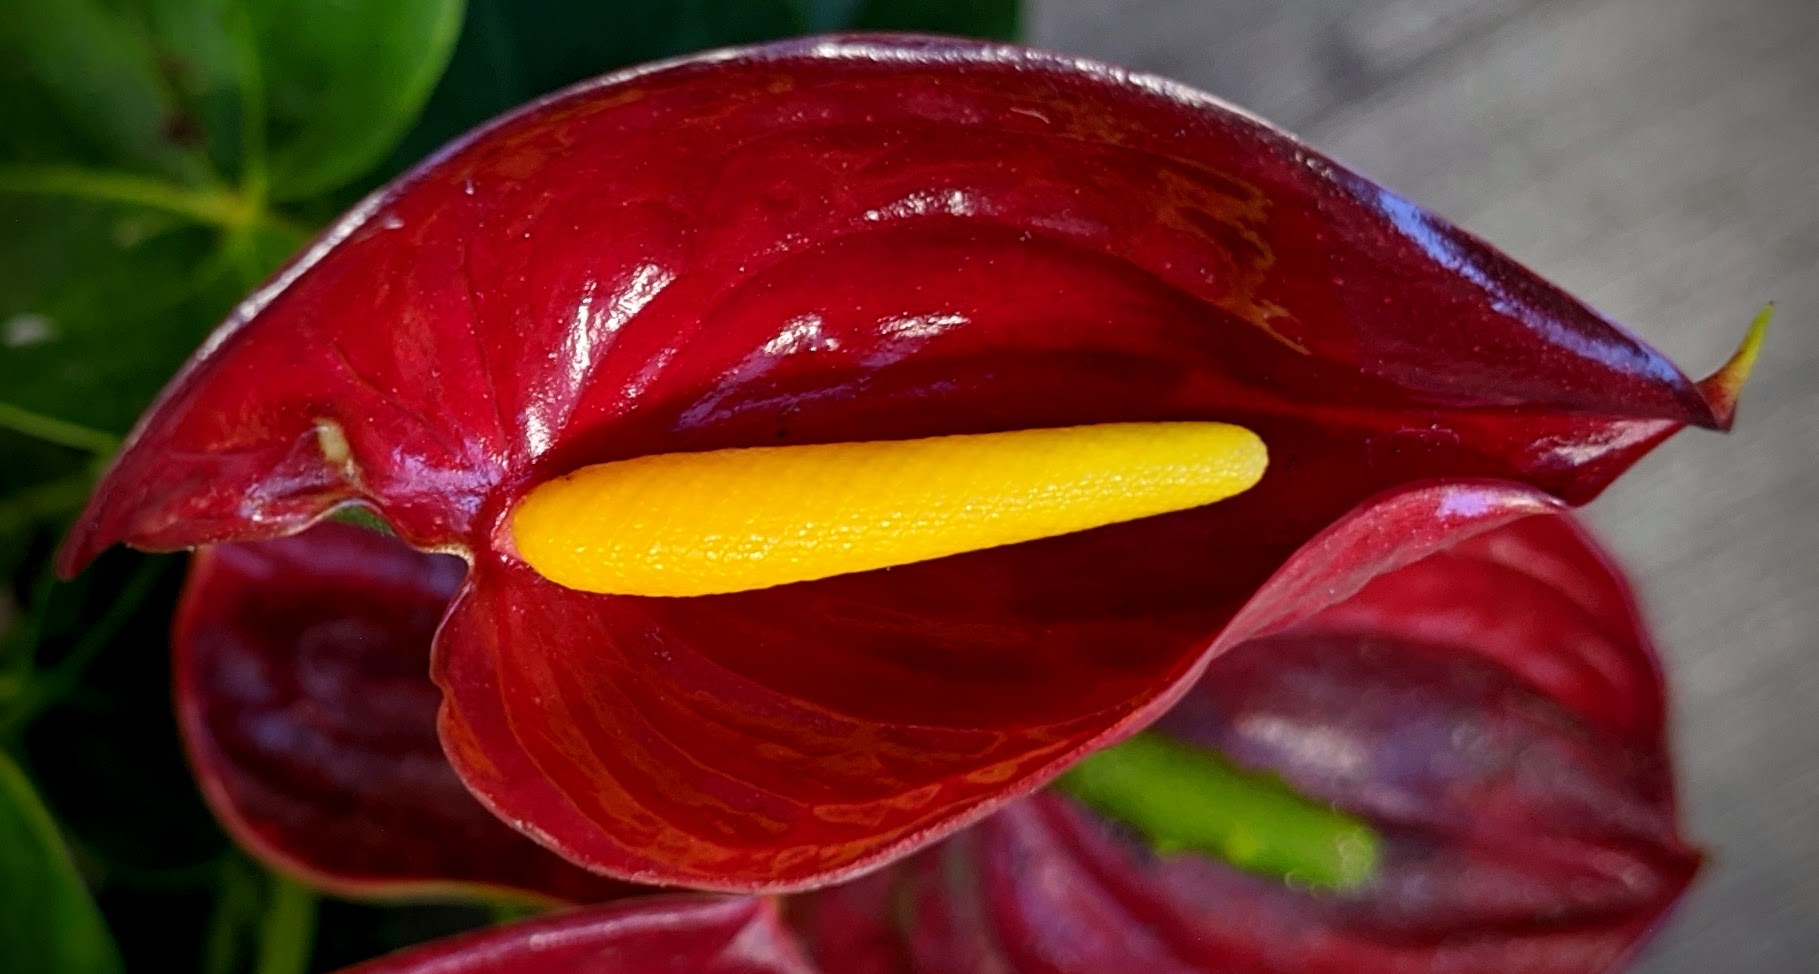 Large exotic red flower with a bright yellow stigma